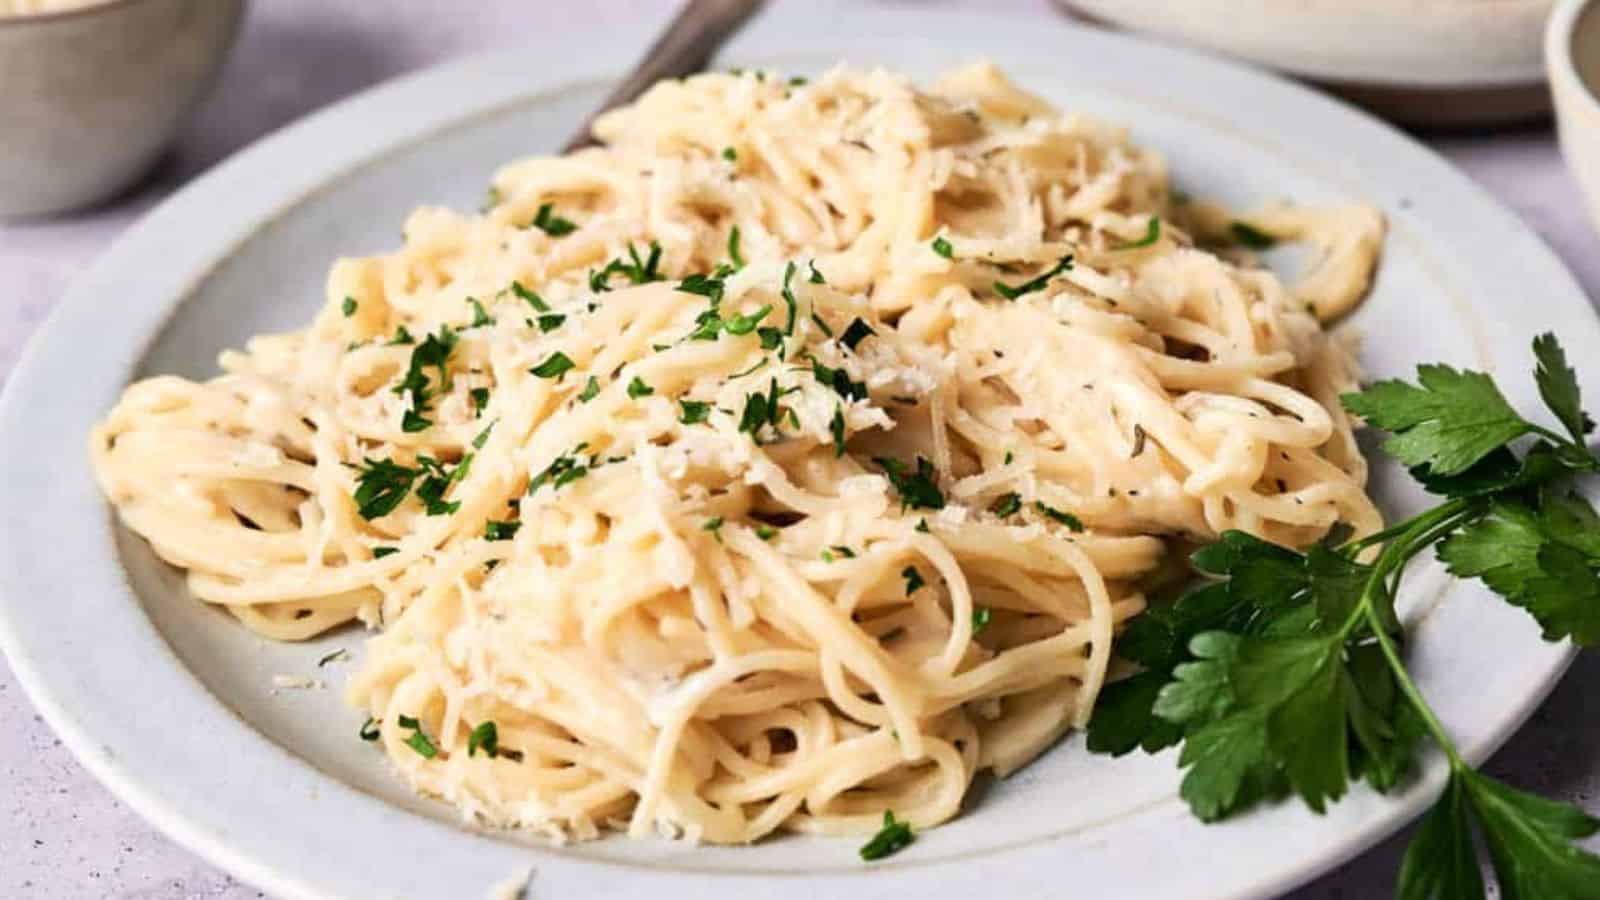 <p>Our Vegan Alfredo Pasta brings a twist to the traditional creamy pasta using no animal products at all. It's rich, it's creamy, and completely plant-based, making it ideal for everyone at the table. Pair it with a simple green salad for a satisfying meal. It's a standout dish that's bound to become a favorite.<br><strong>Get the Recipe: </strong><a href="https://twocityvegans.com/vegan-alfredo-pasta/?utm_source=msn&utm_medium=page&utm_campaign=">Vegan Alfredo Pasta</a></p>